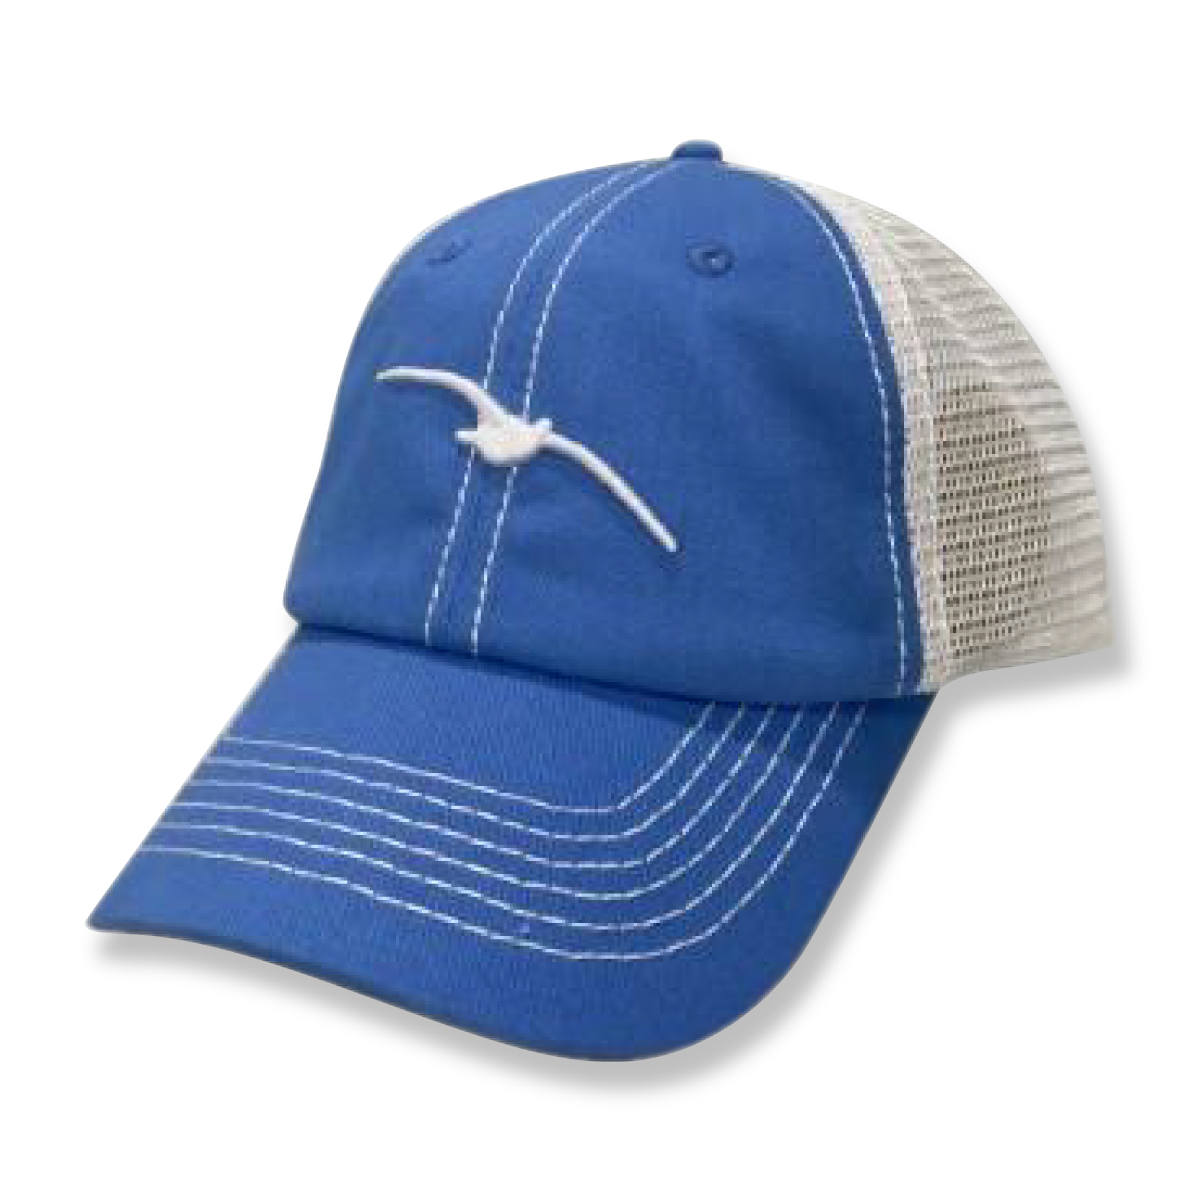 3D Embroidered Sky Blue ‘Coming in Hot’ Mesh Back Cap (Free Shipping)